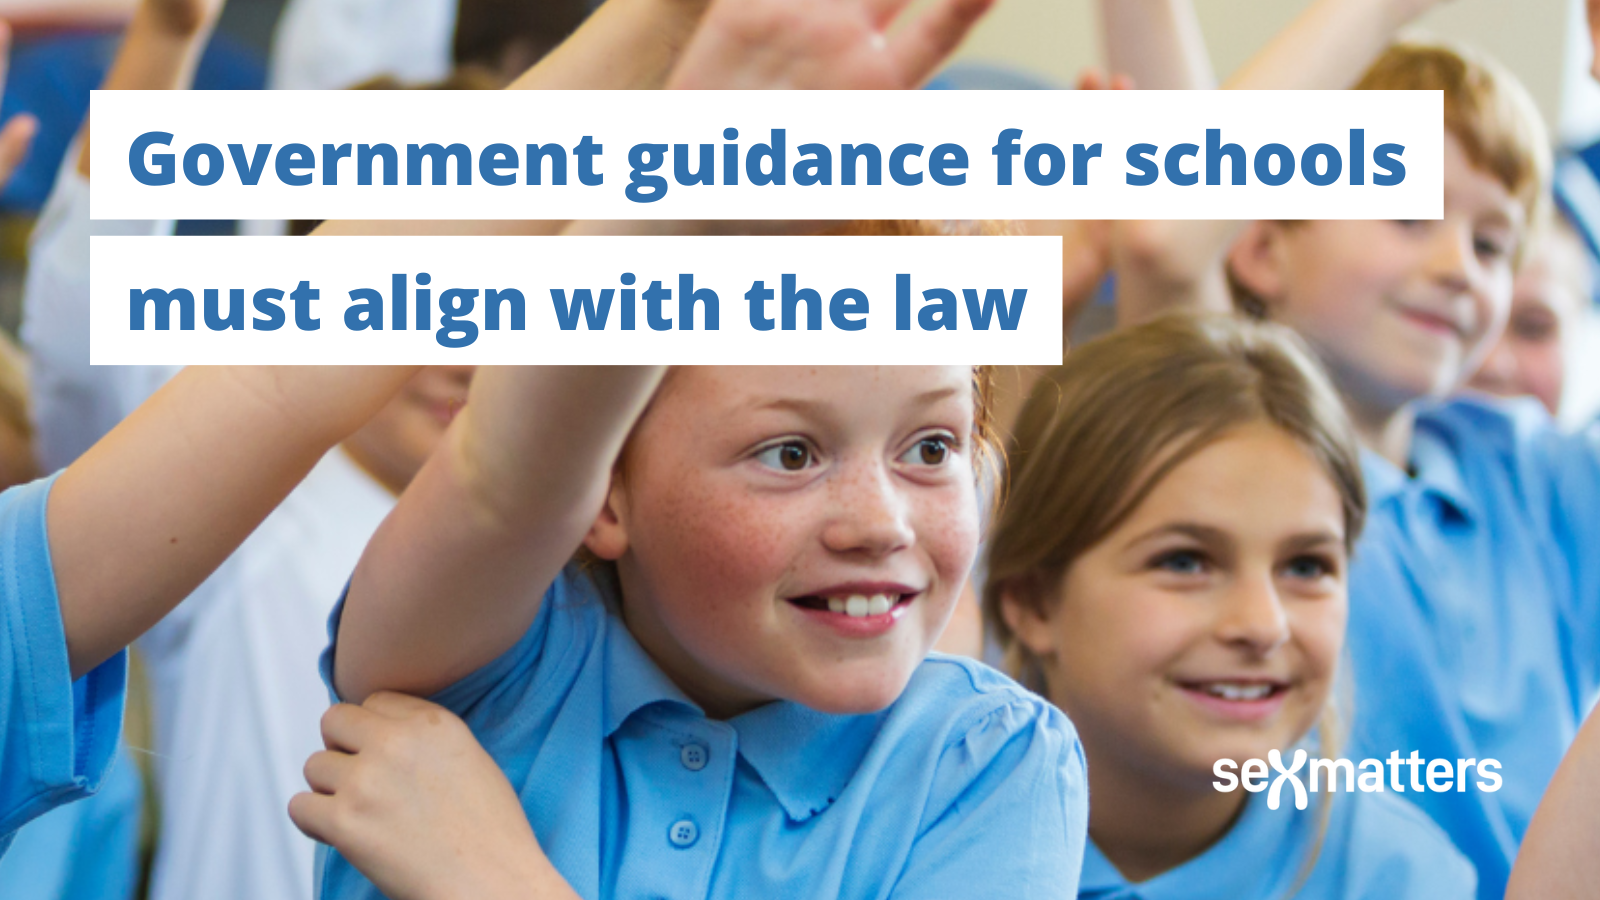 Government guidance for schools must align with the law